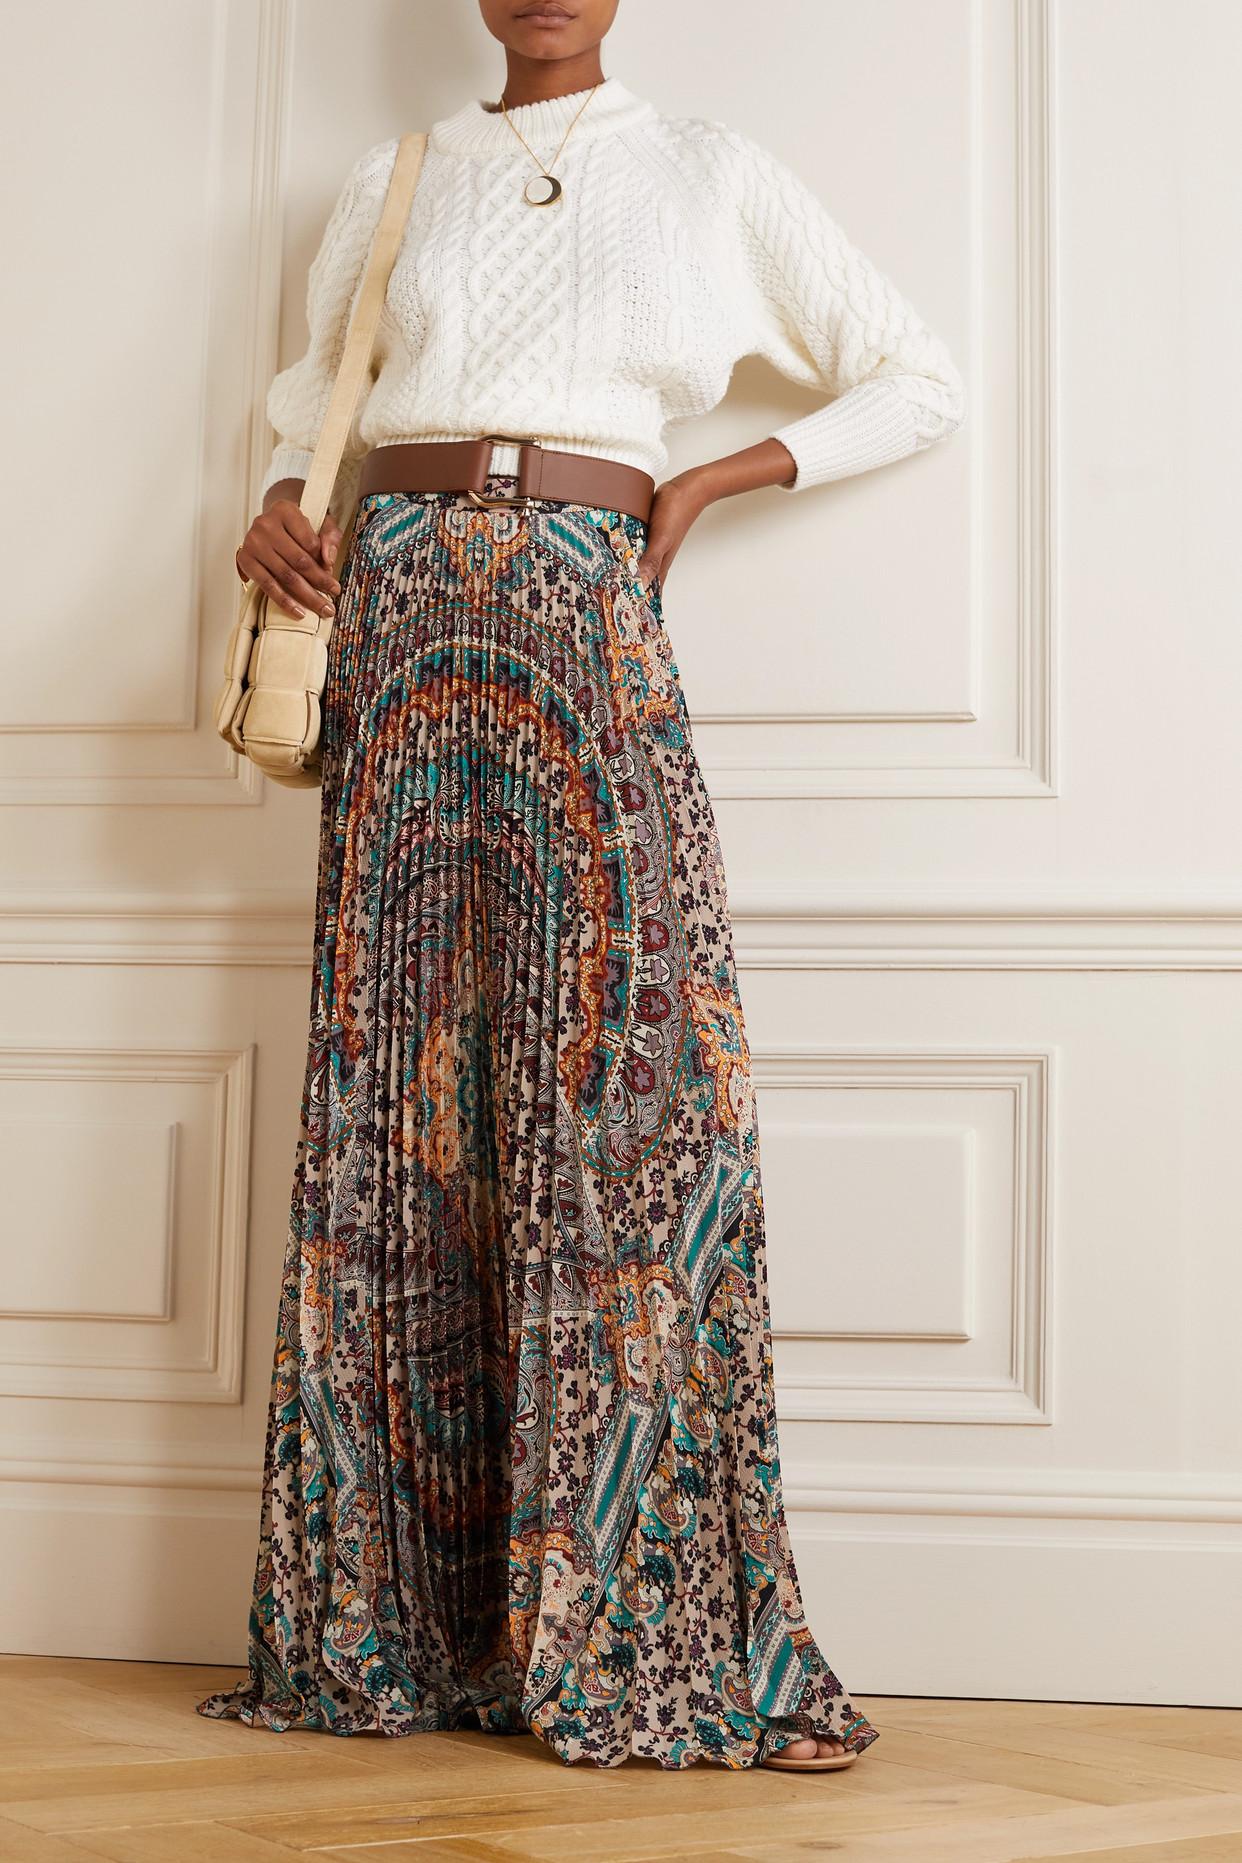 ETRO Paisley Printed Pleats Skirt Second Hand / Selling